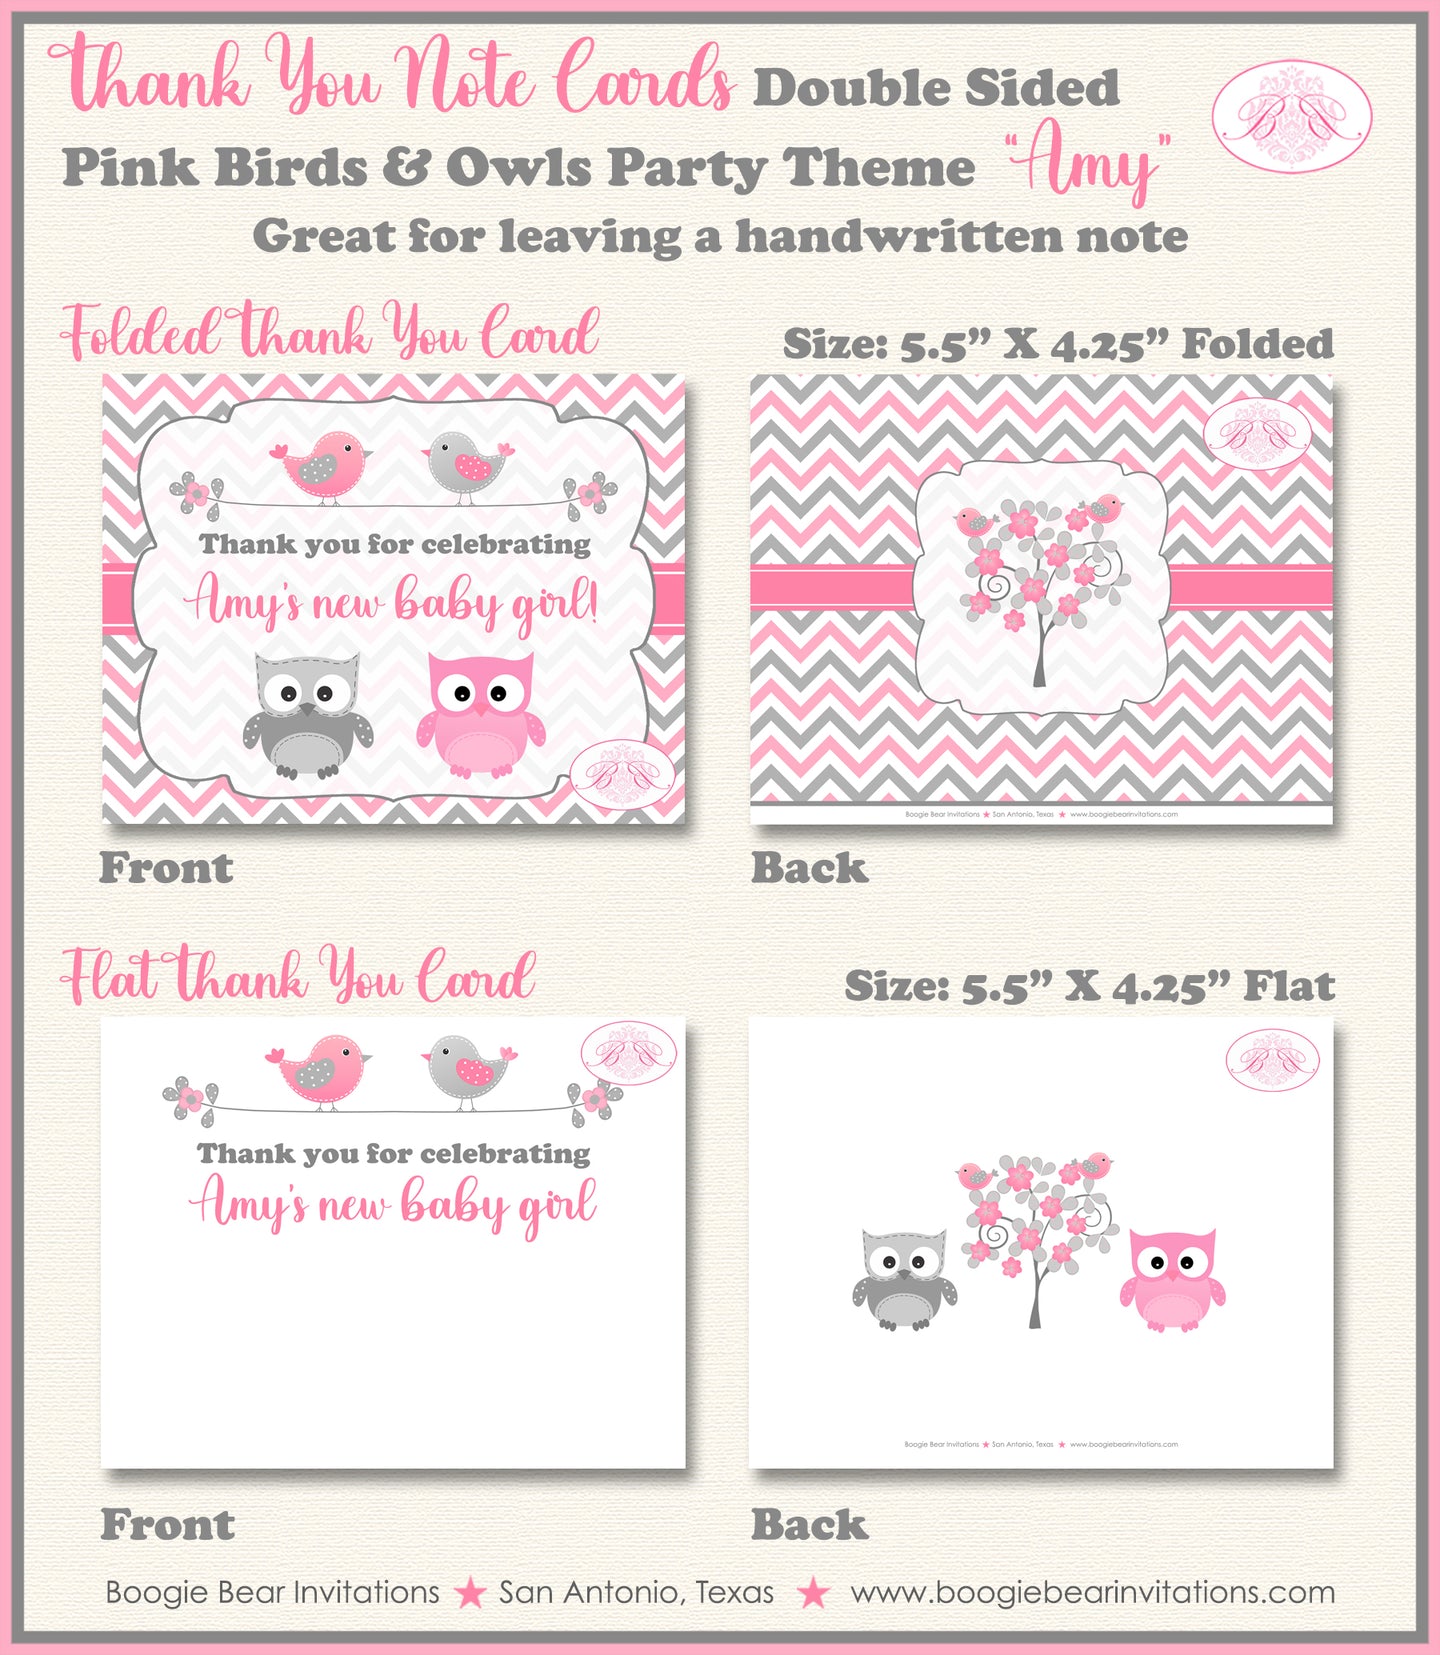 Pink Birds Owls Girl Thank You Card Baby Shower Party Girl Woodland Boogie Bear Invitations Amy Theme Printed